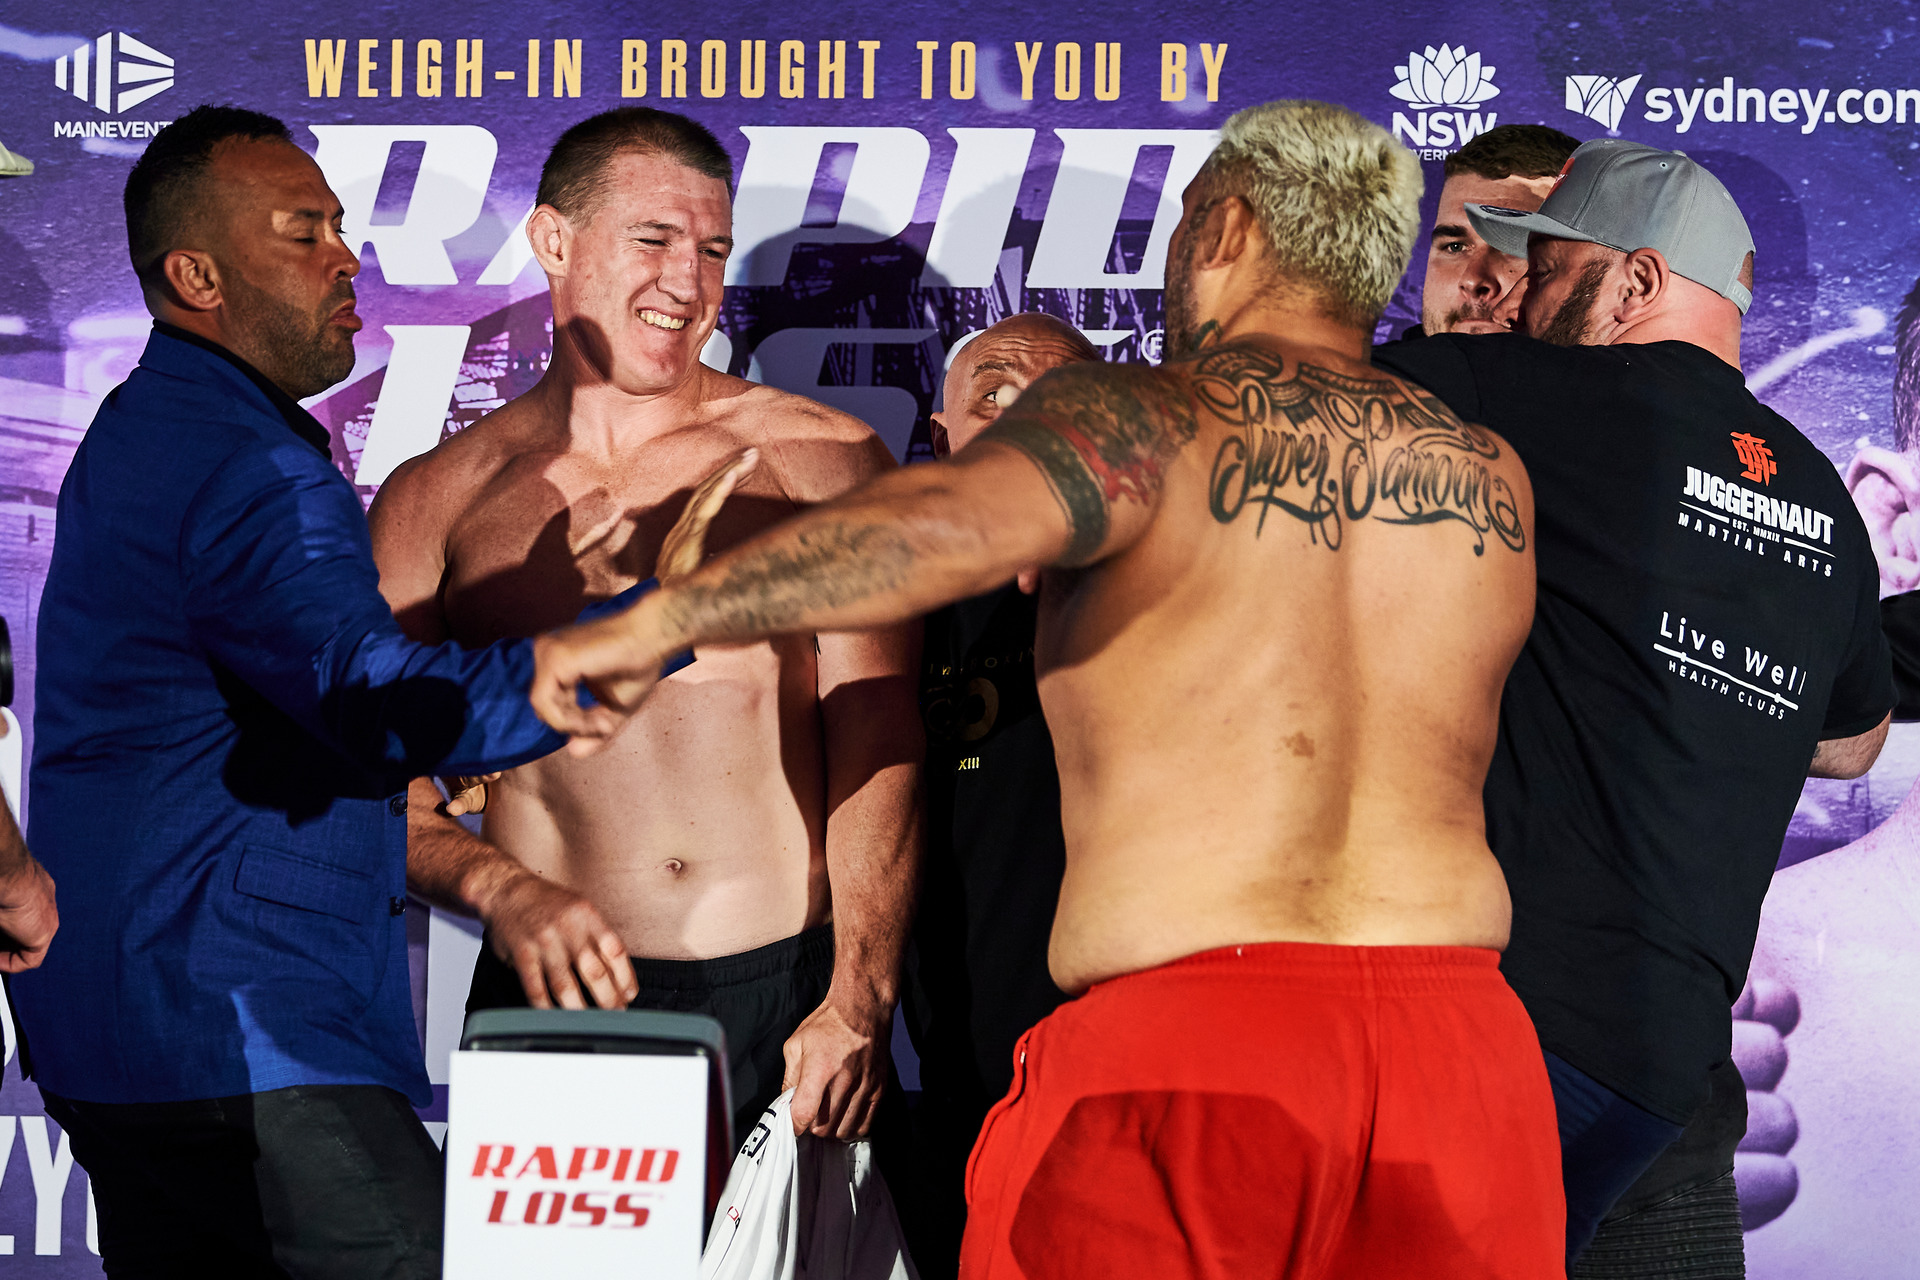 Boxing Kiwi UFC fighter Mark Hunt throws punch at Australian league legend Paul Gallen during weigh-in for blockbuster fight